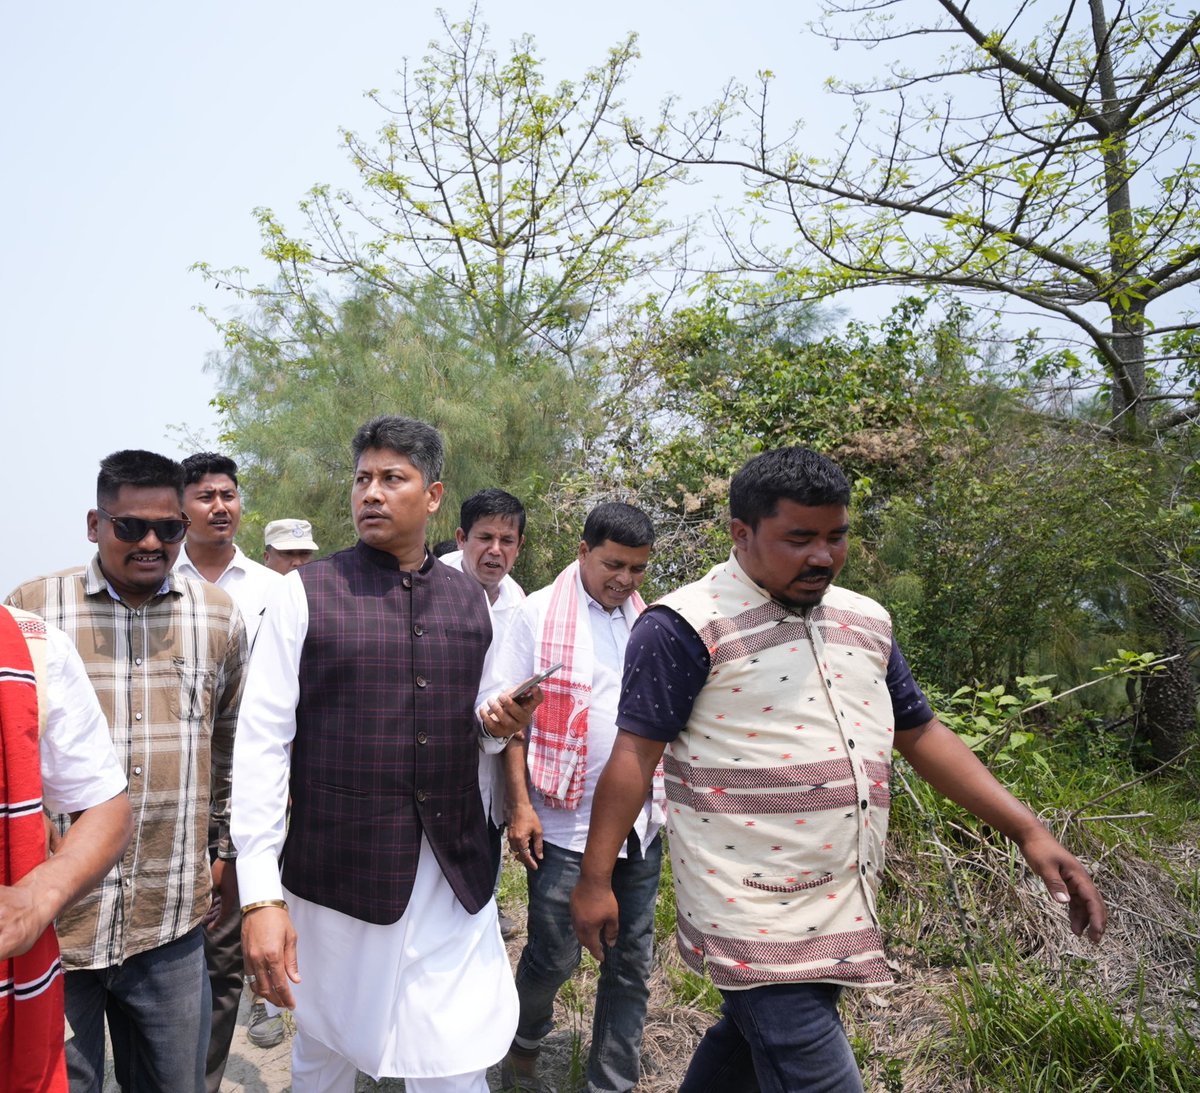 Started the Assamese New Year, visiting the erosion affected Sikoli Chapori under Ahatguri GP in Majuli.

Will complete the erosion protection in phases.